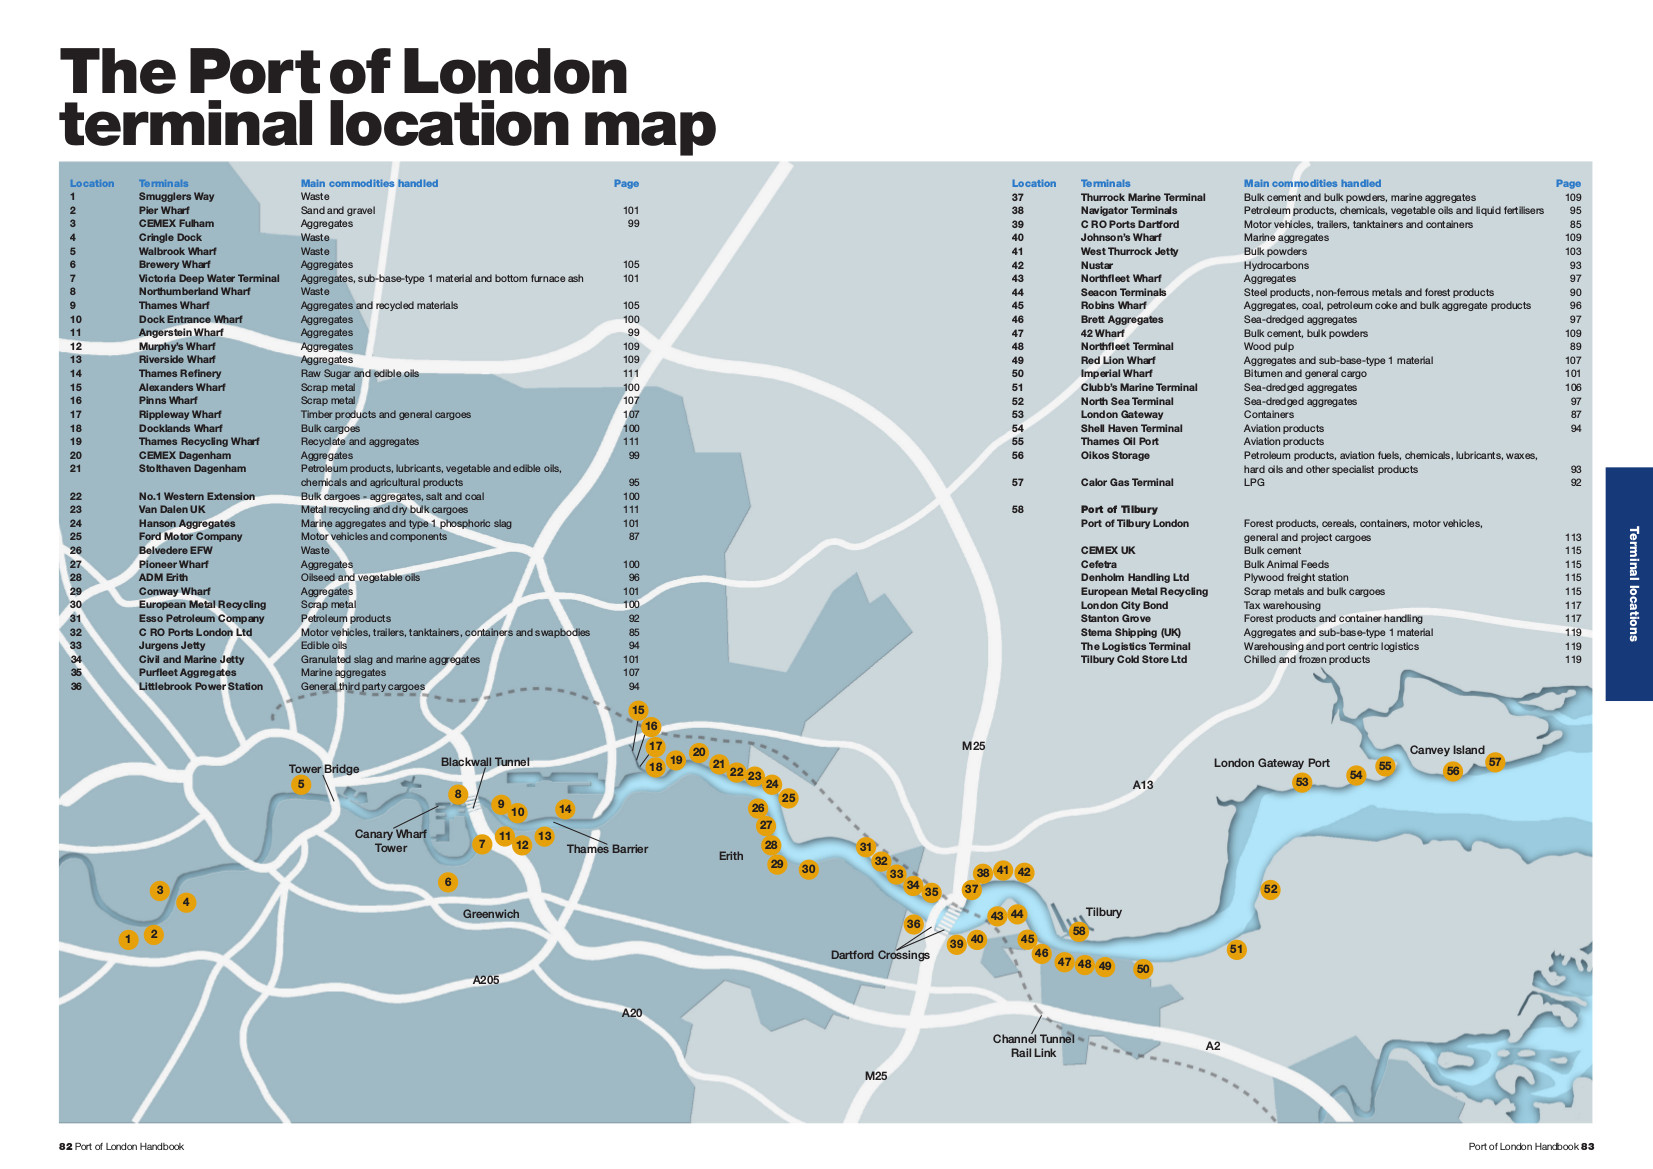 Terminal location map for Port of London